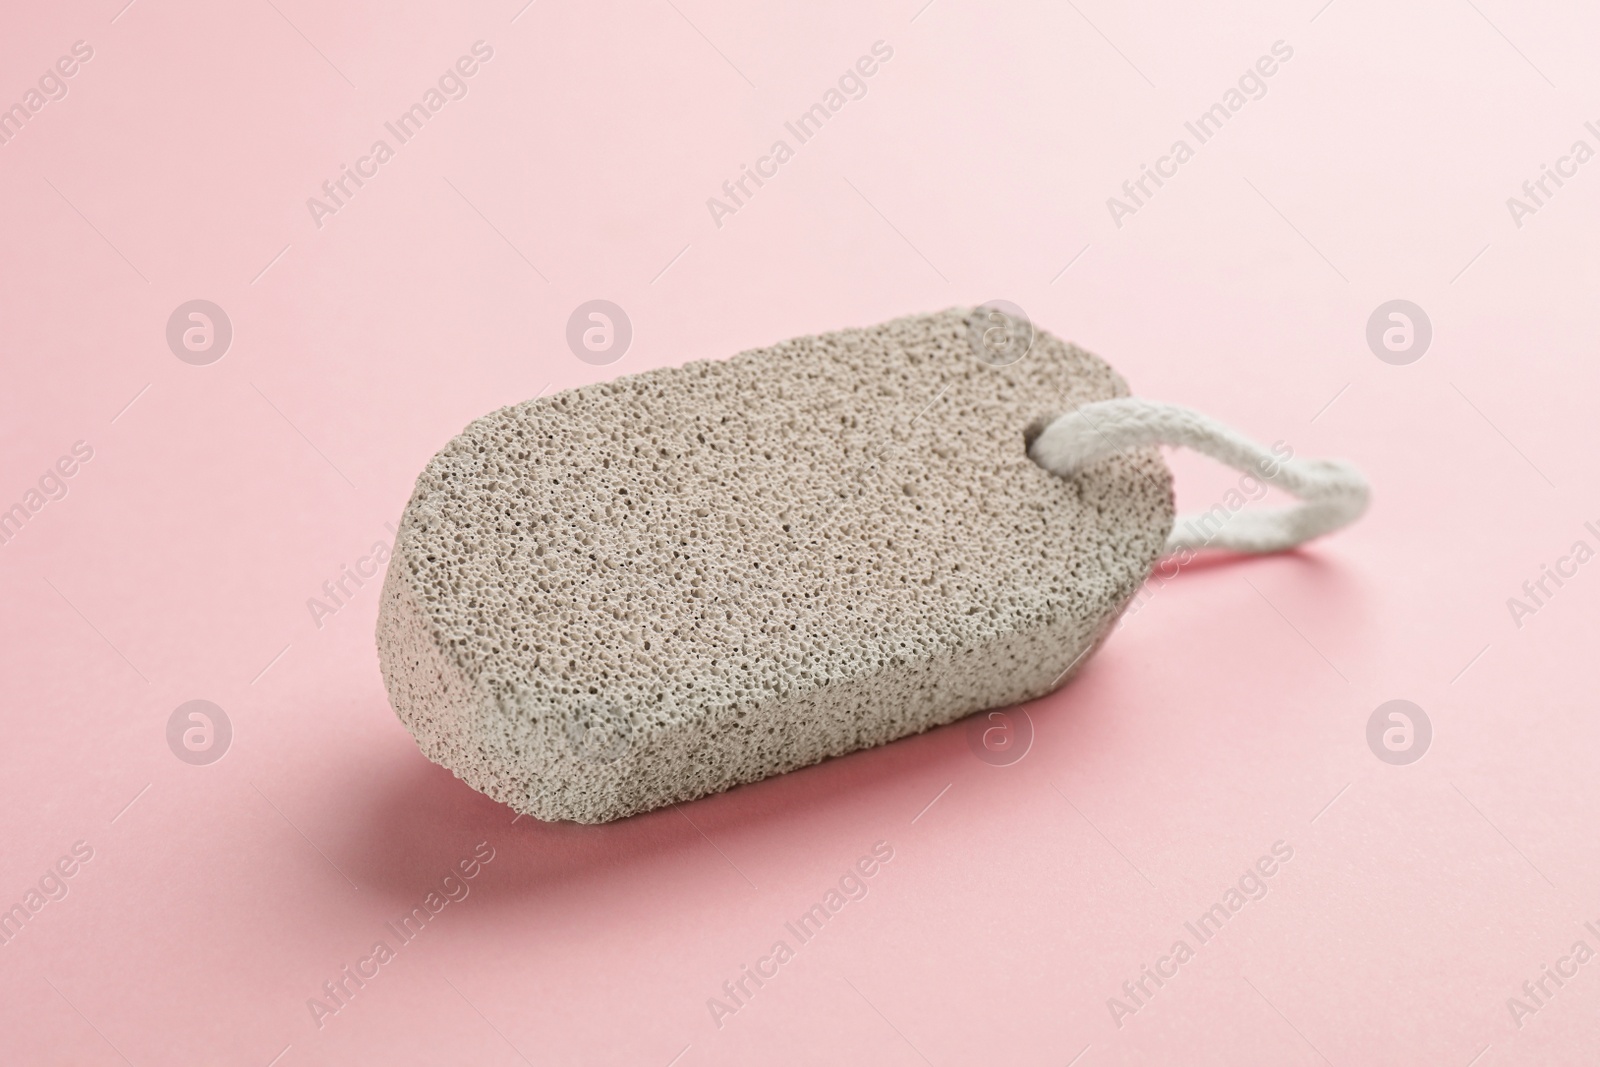 Photo of Pumice stone on pink background. Pedicure tool